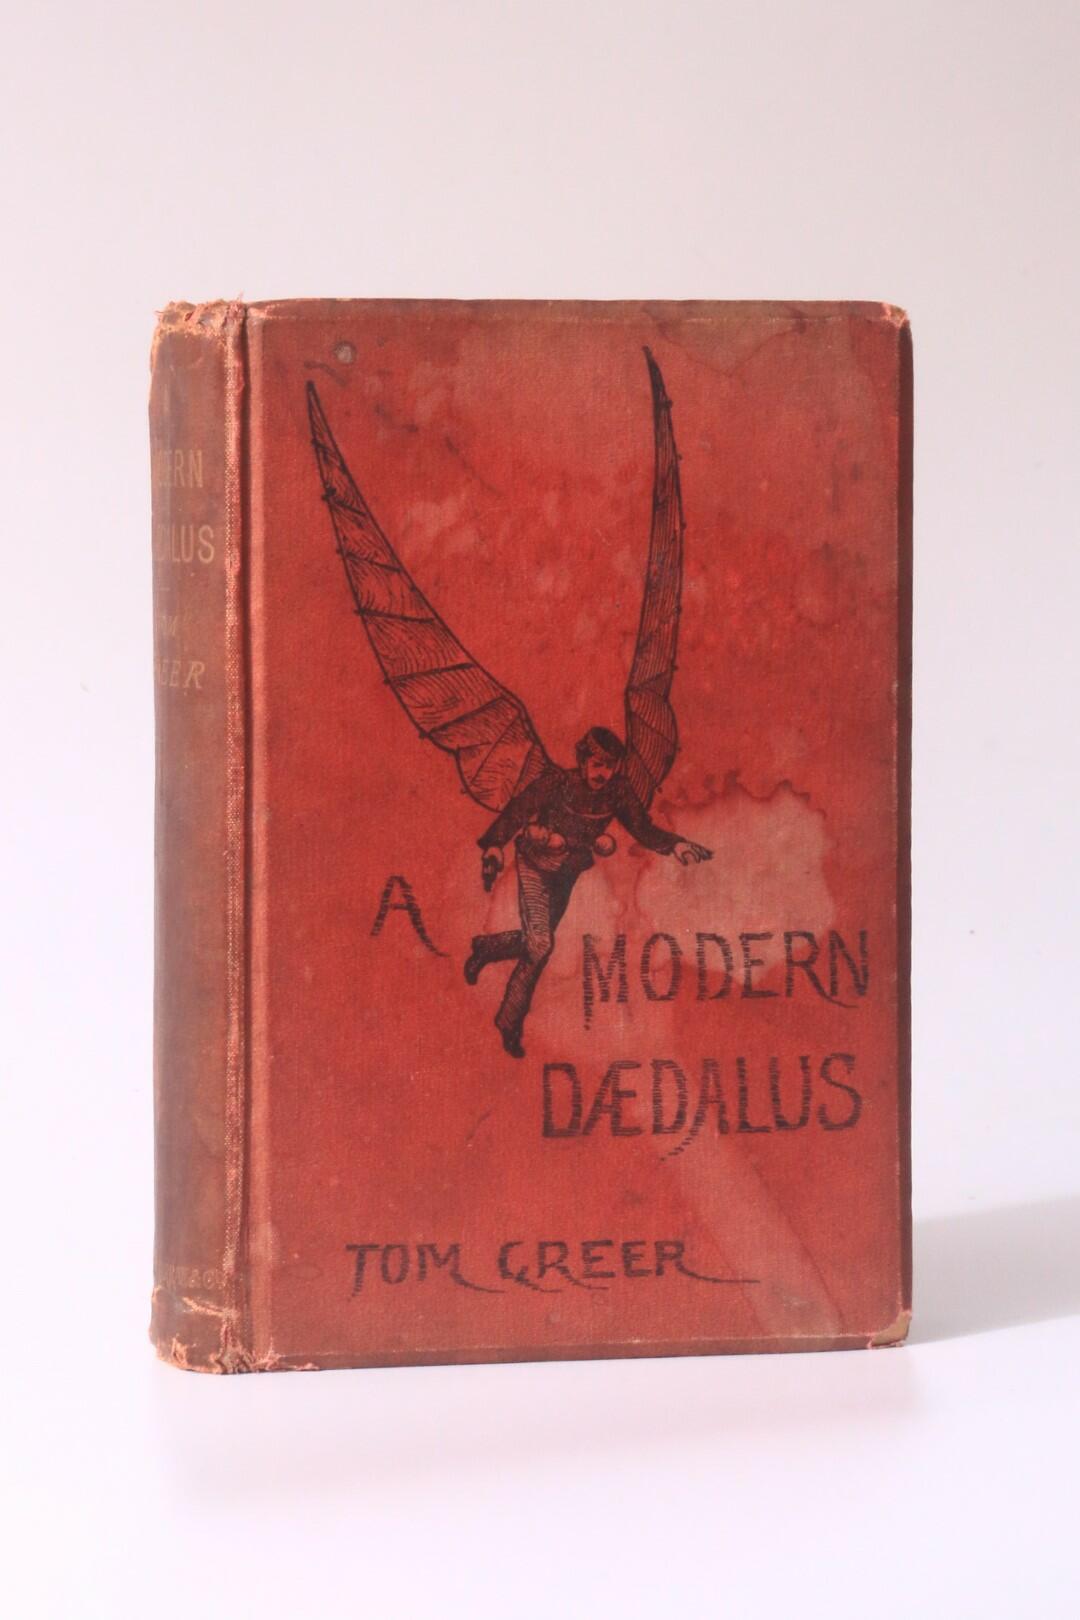 Tom Greer - A Modern Daedalus [D?dalus] - Griffith, Farran, Okeden & Welsh, 1885, First Edition.